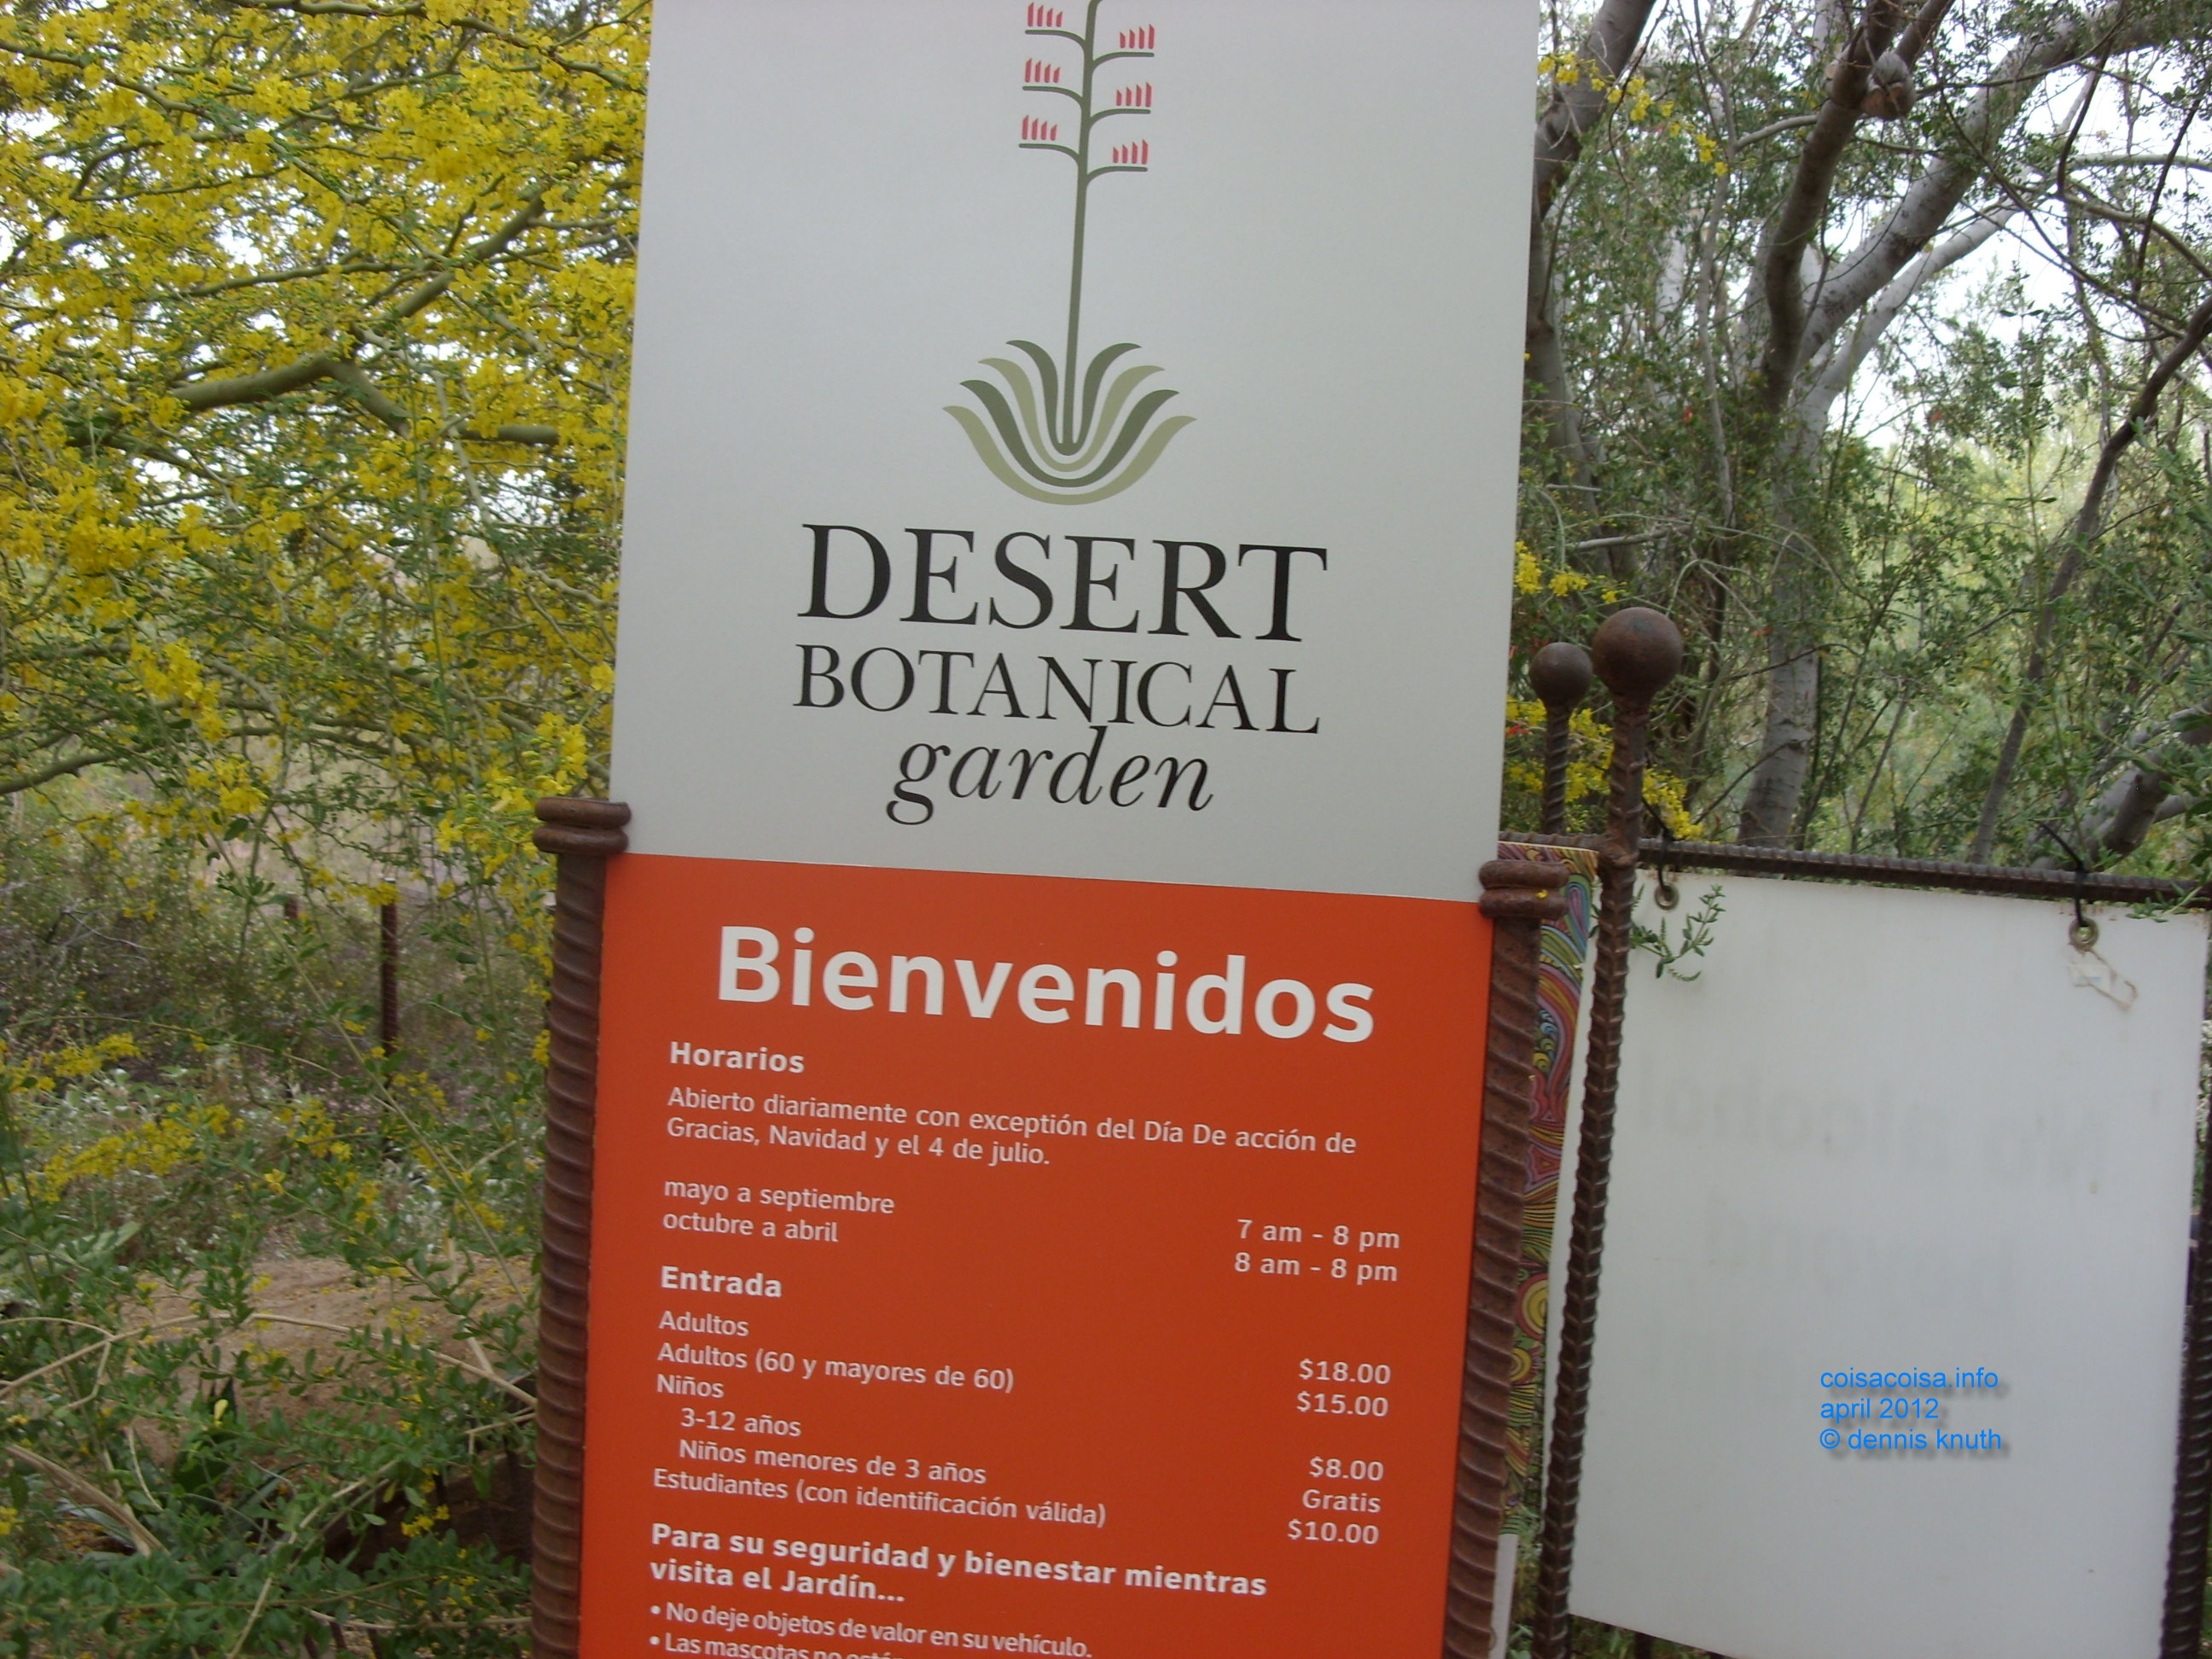 Prices at the Botanical Gardens in Phoenix